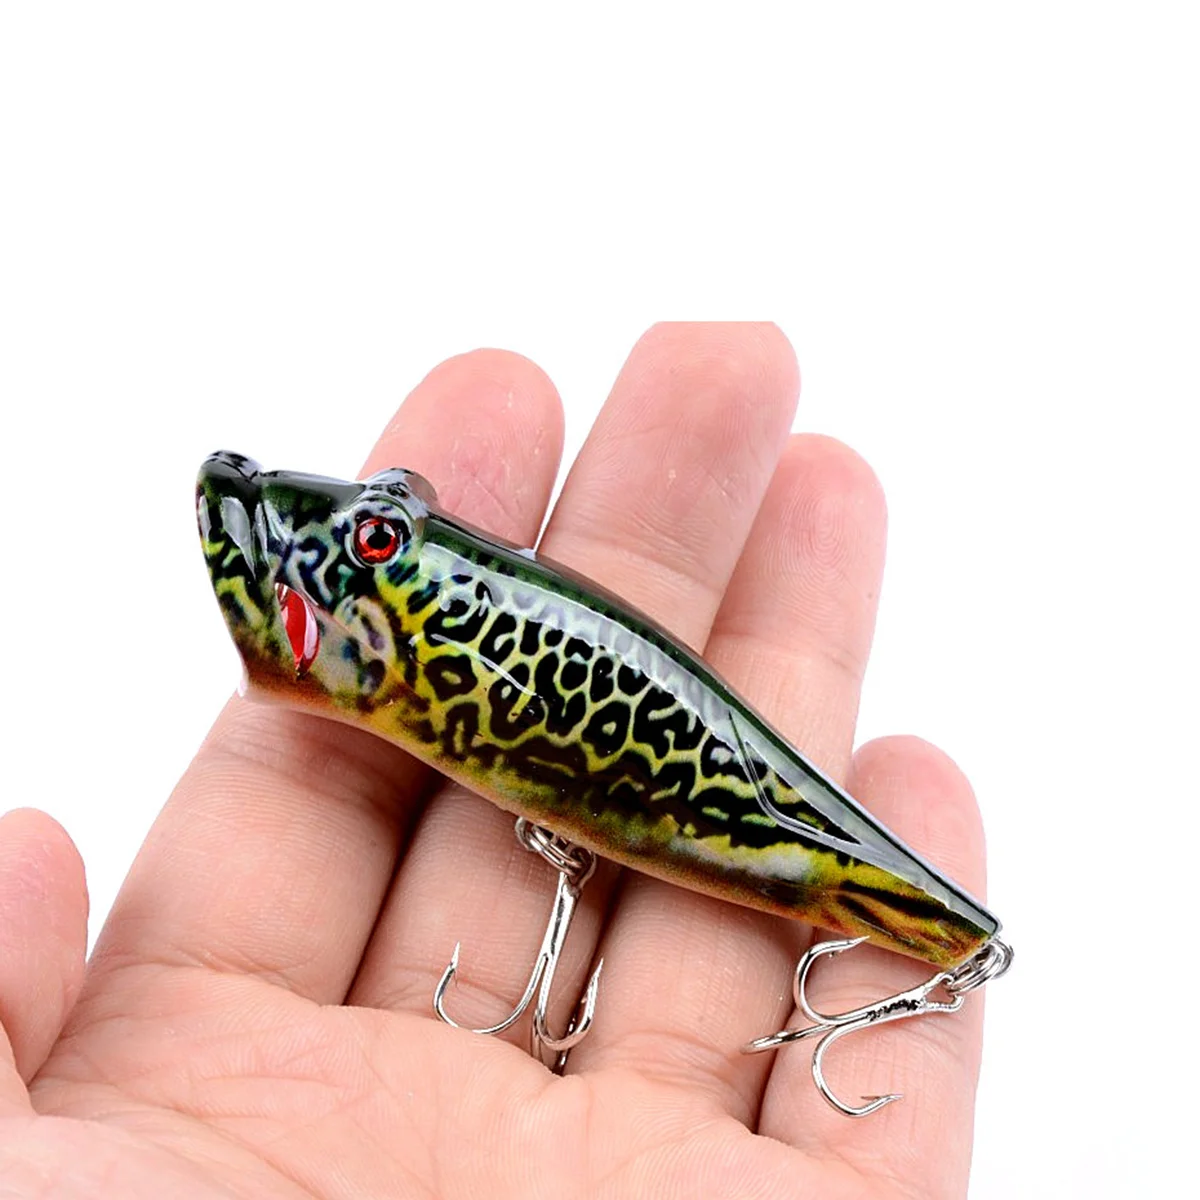 

5 Pcs Fishing Lures Colorful Painted Plastic Baits Deep Sea Baits Floating Fishing Lures for Perch Catfish